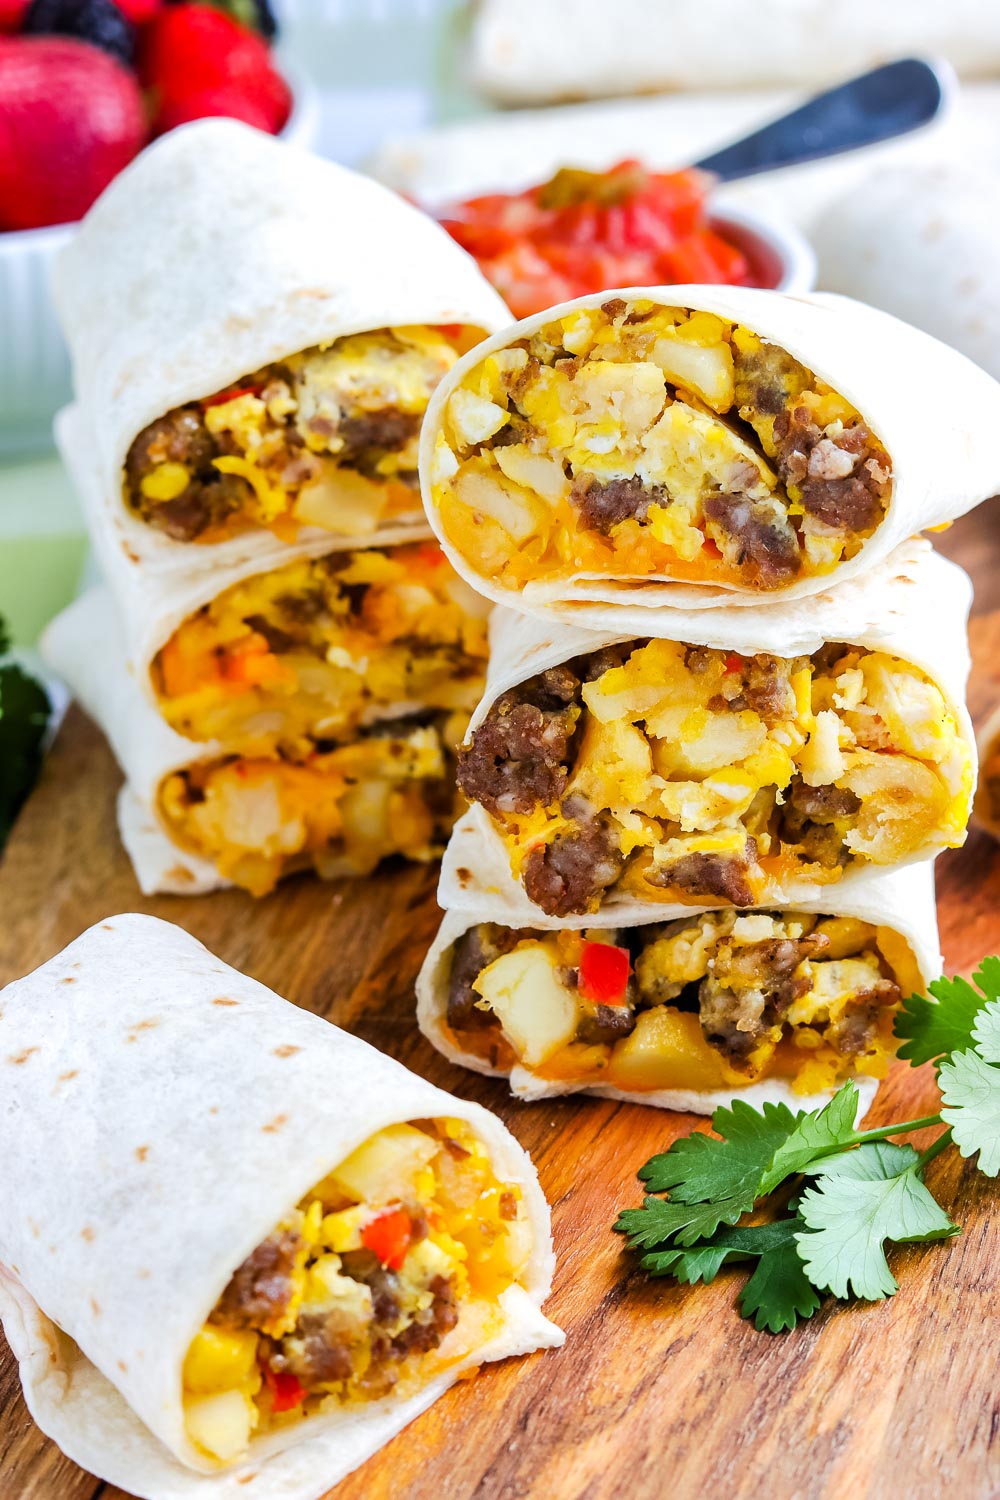 Burrito & tortilla maker - A mexican food cooking school & Roti master cook  by Kids Fun Plus